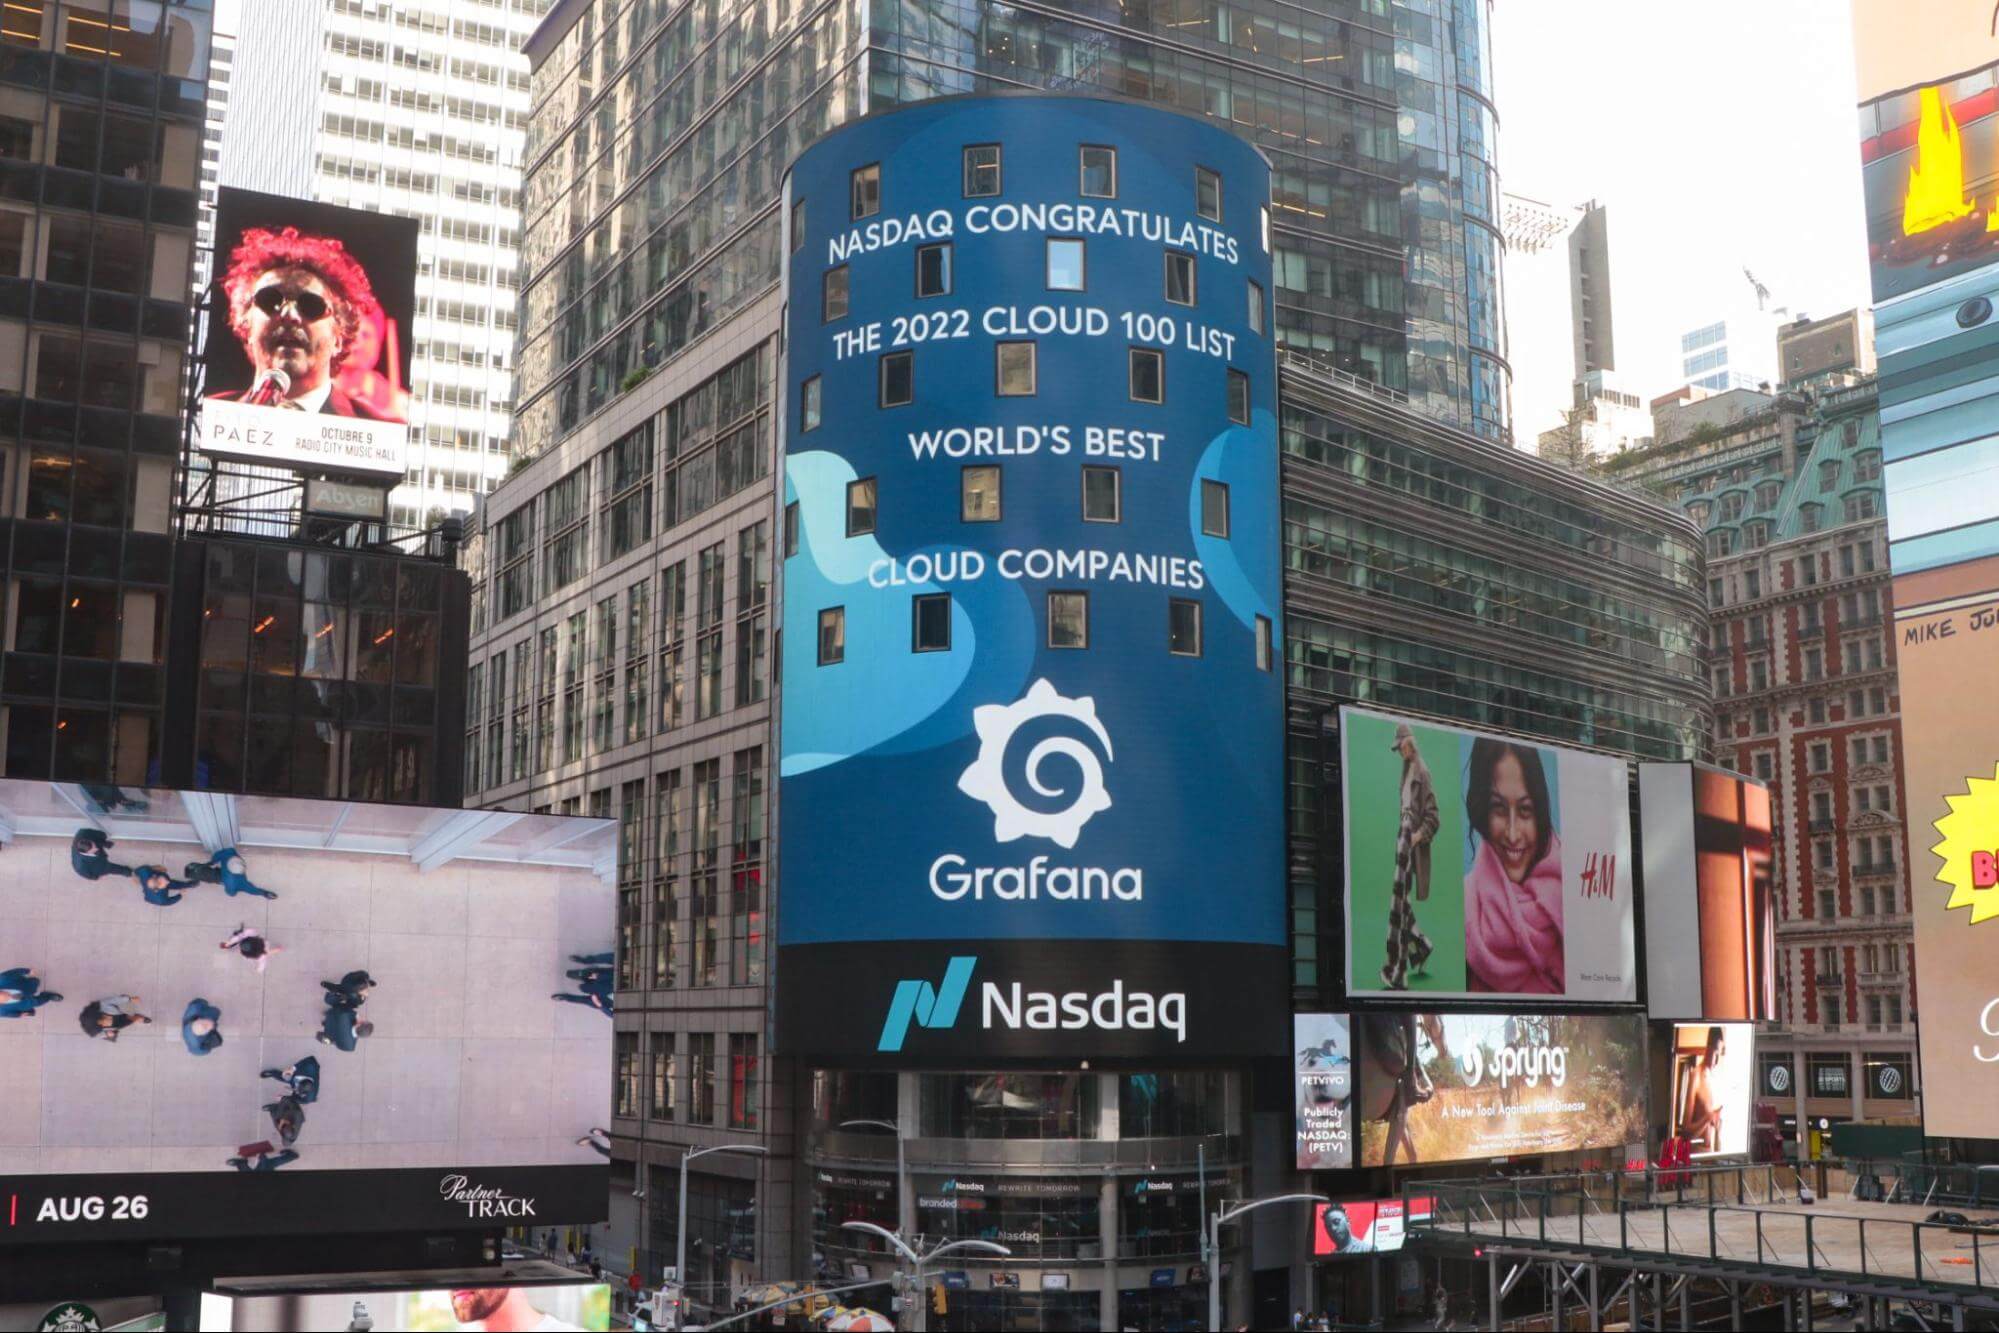 A picture of the Grafana Labs logo displayed on a billboard in Times Square, in New York, celebrating the 2022 Cloud 100 List.